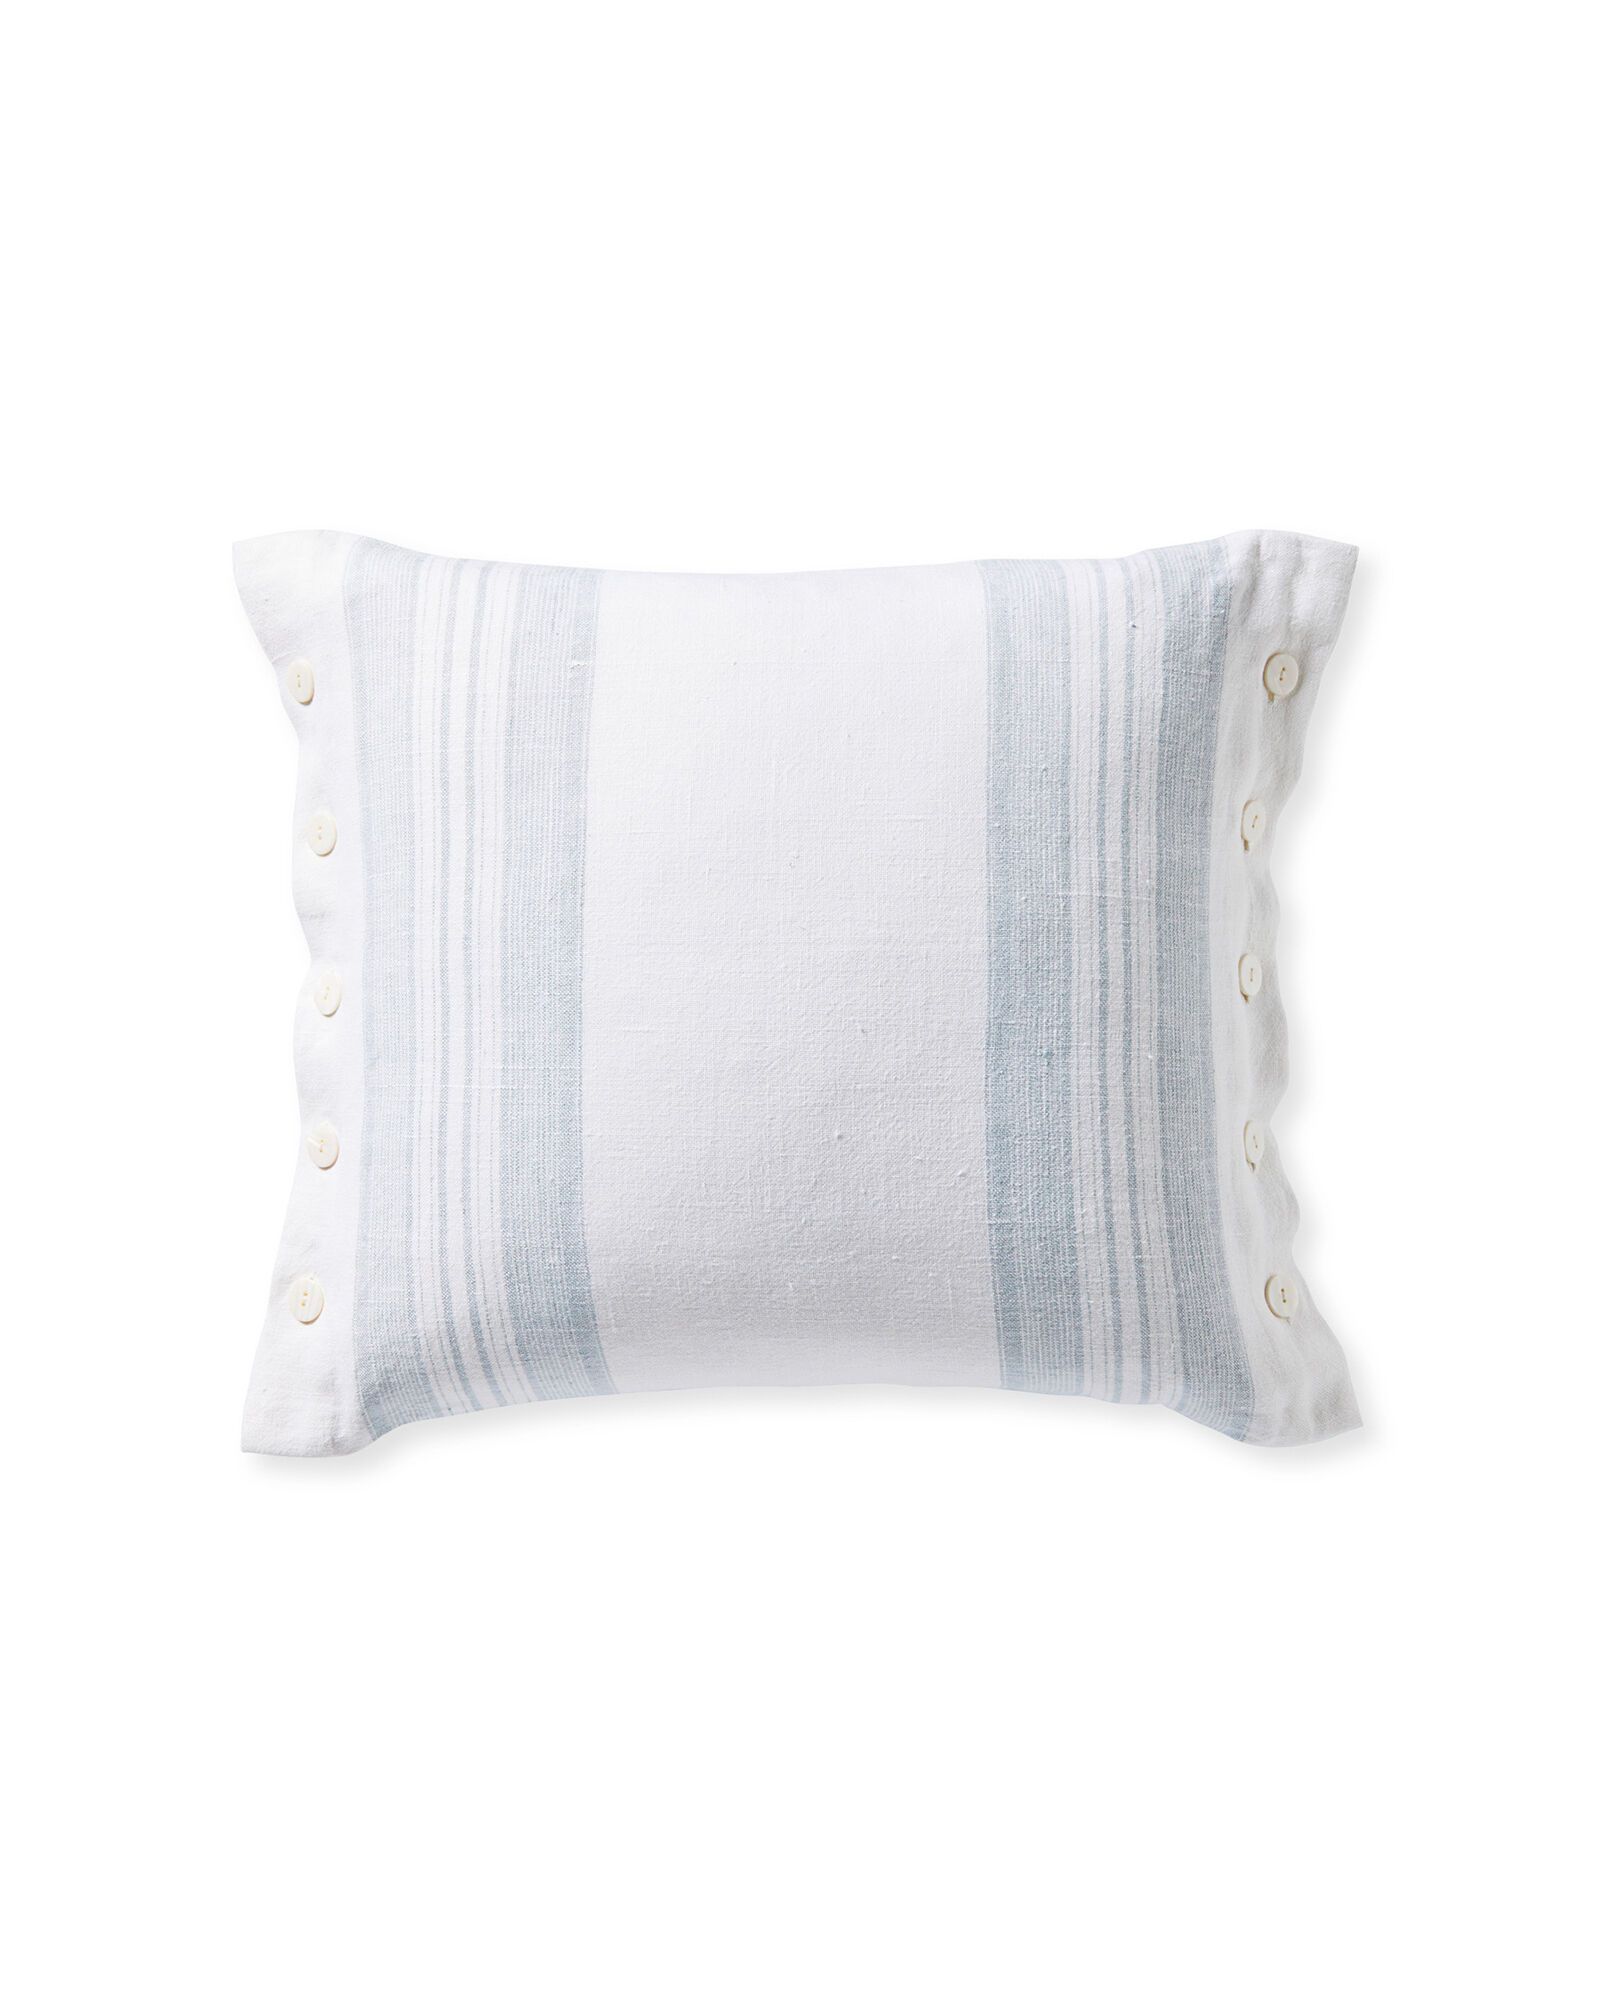 Shoreham Pillow Cover | Serena and Lily